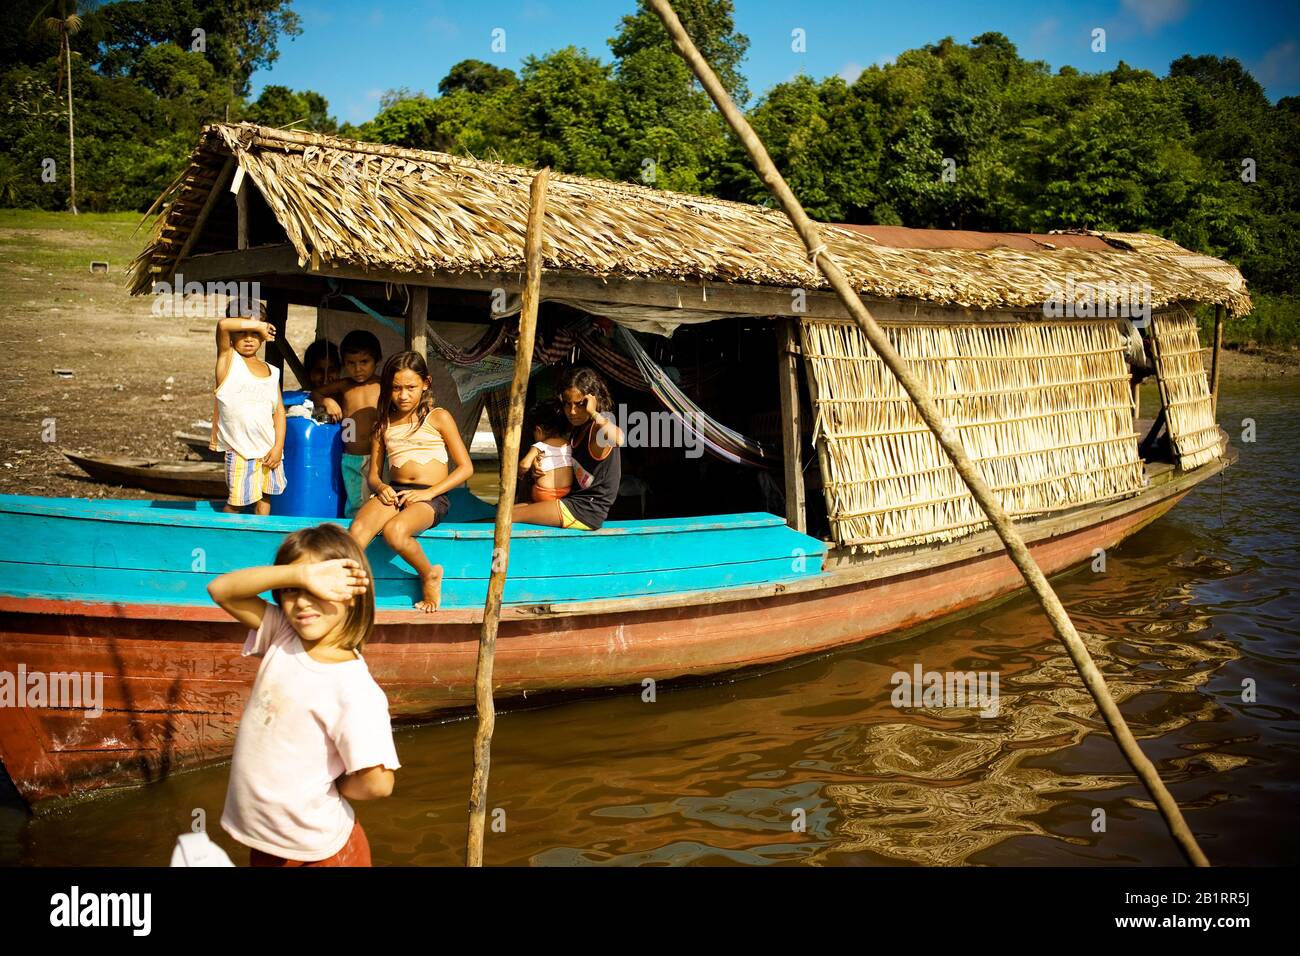 Brazil Boat Girl High Resolution Stock Photography and Images - Alamy